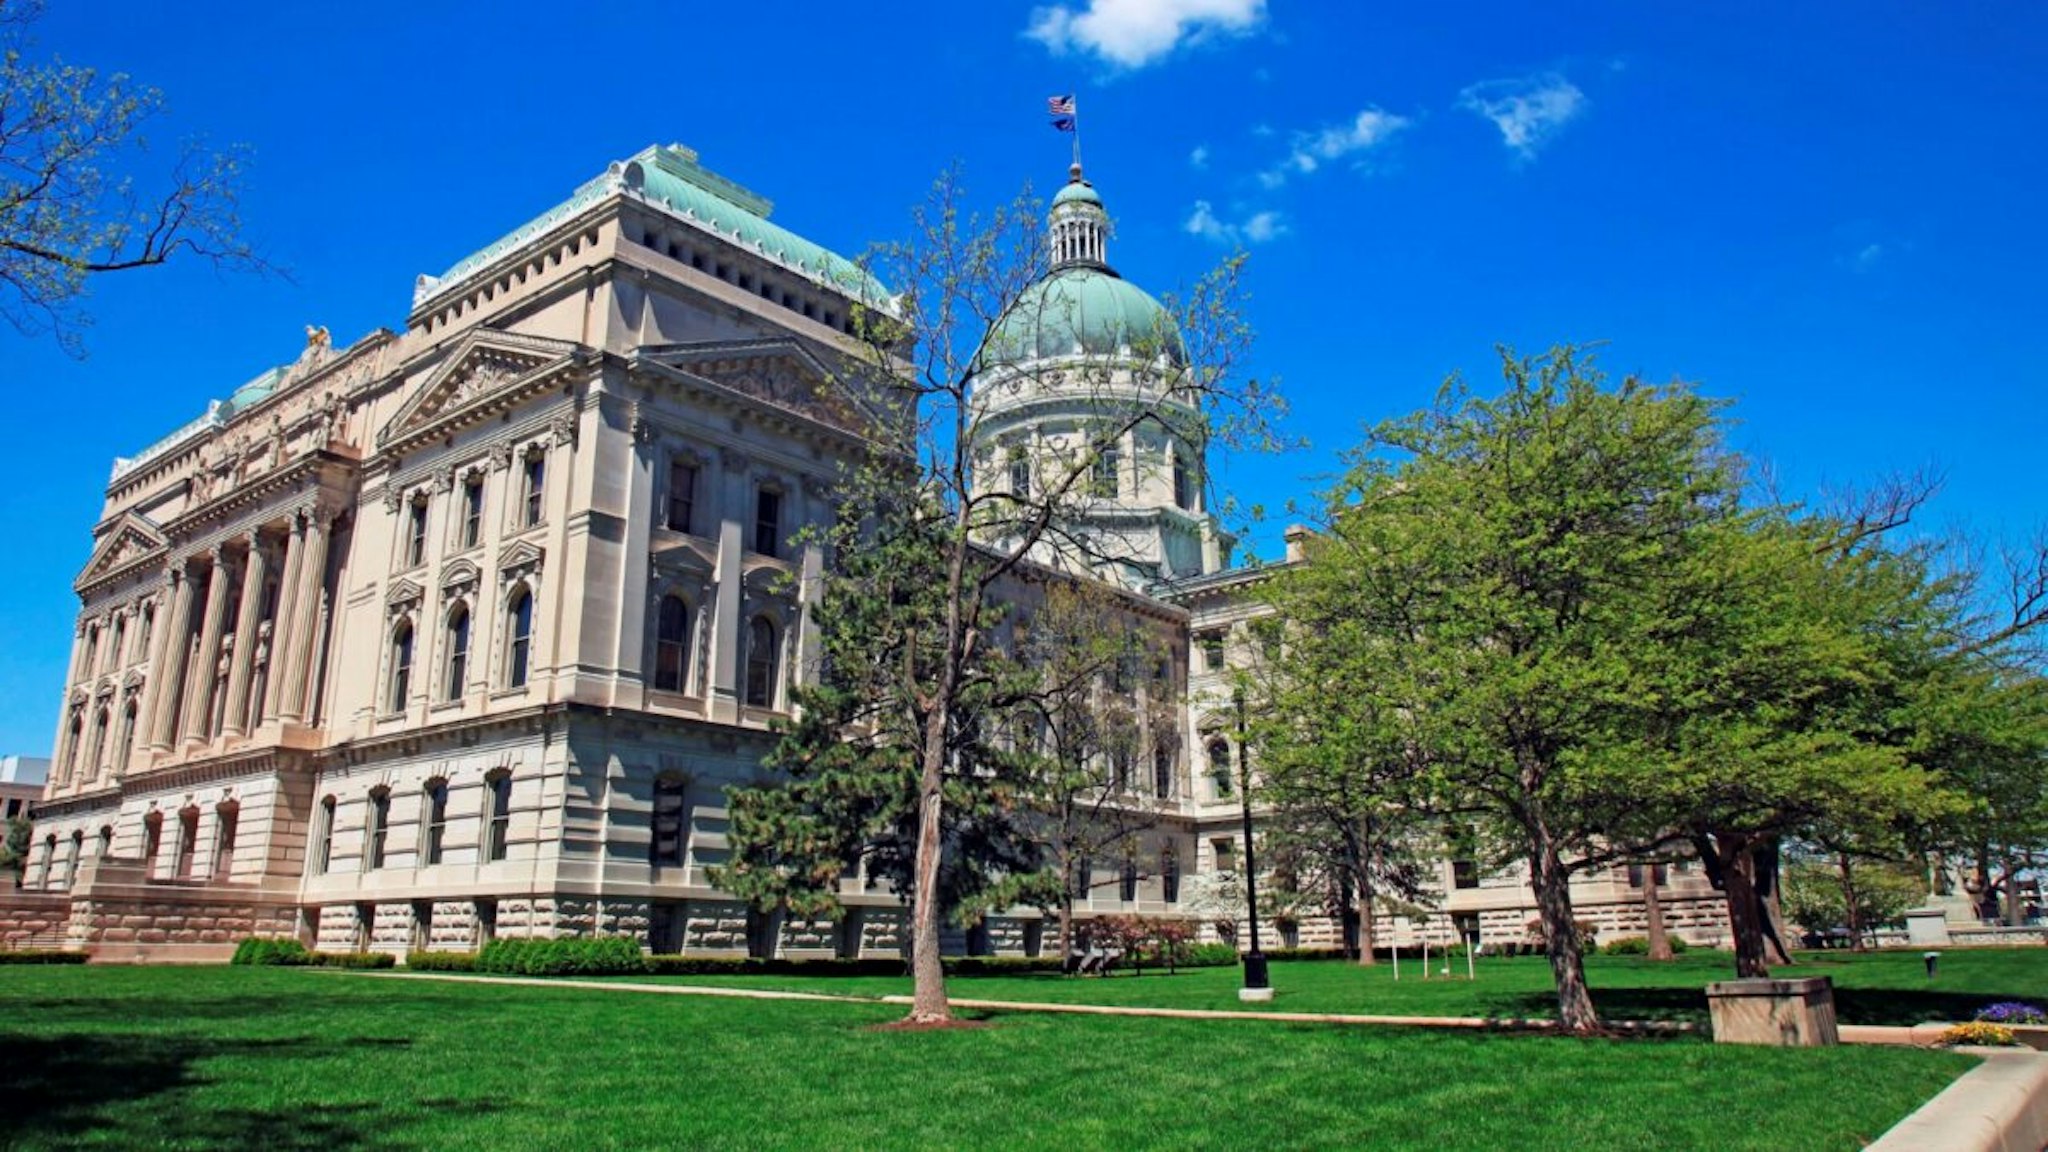 State capitol building in downtown Indianapolis Indiana on a sunny spring morning, Indianapolis is the capital city of Indiana and is located in the center of the state with the capitol building located downtown.